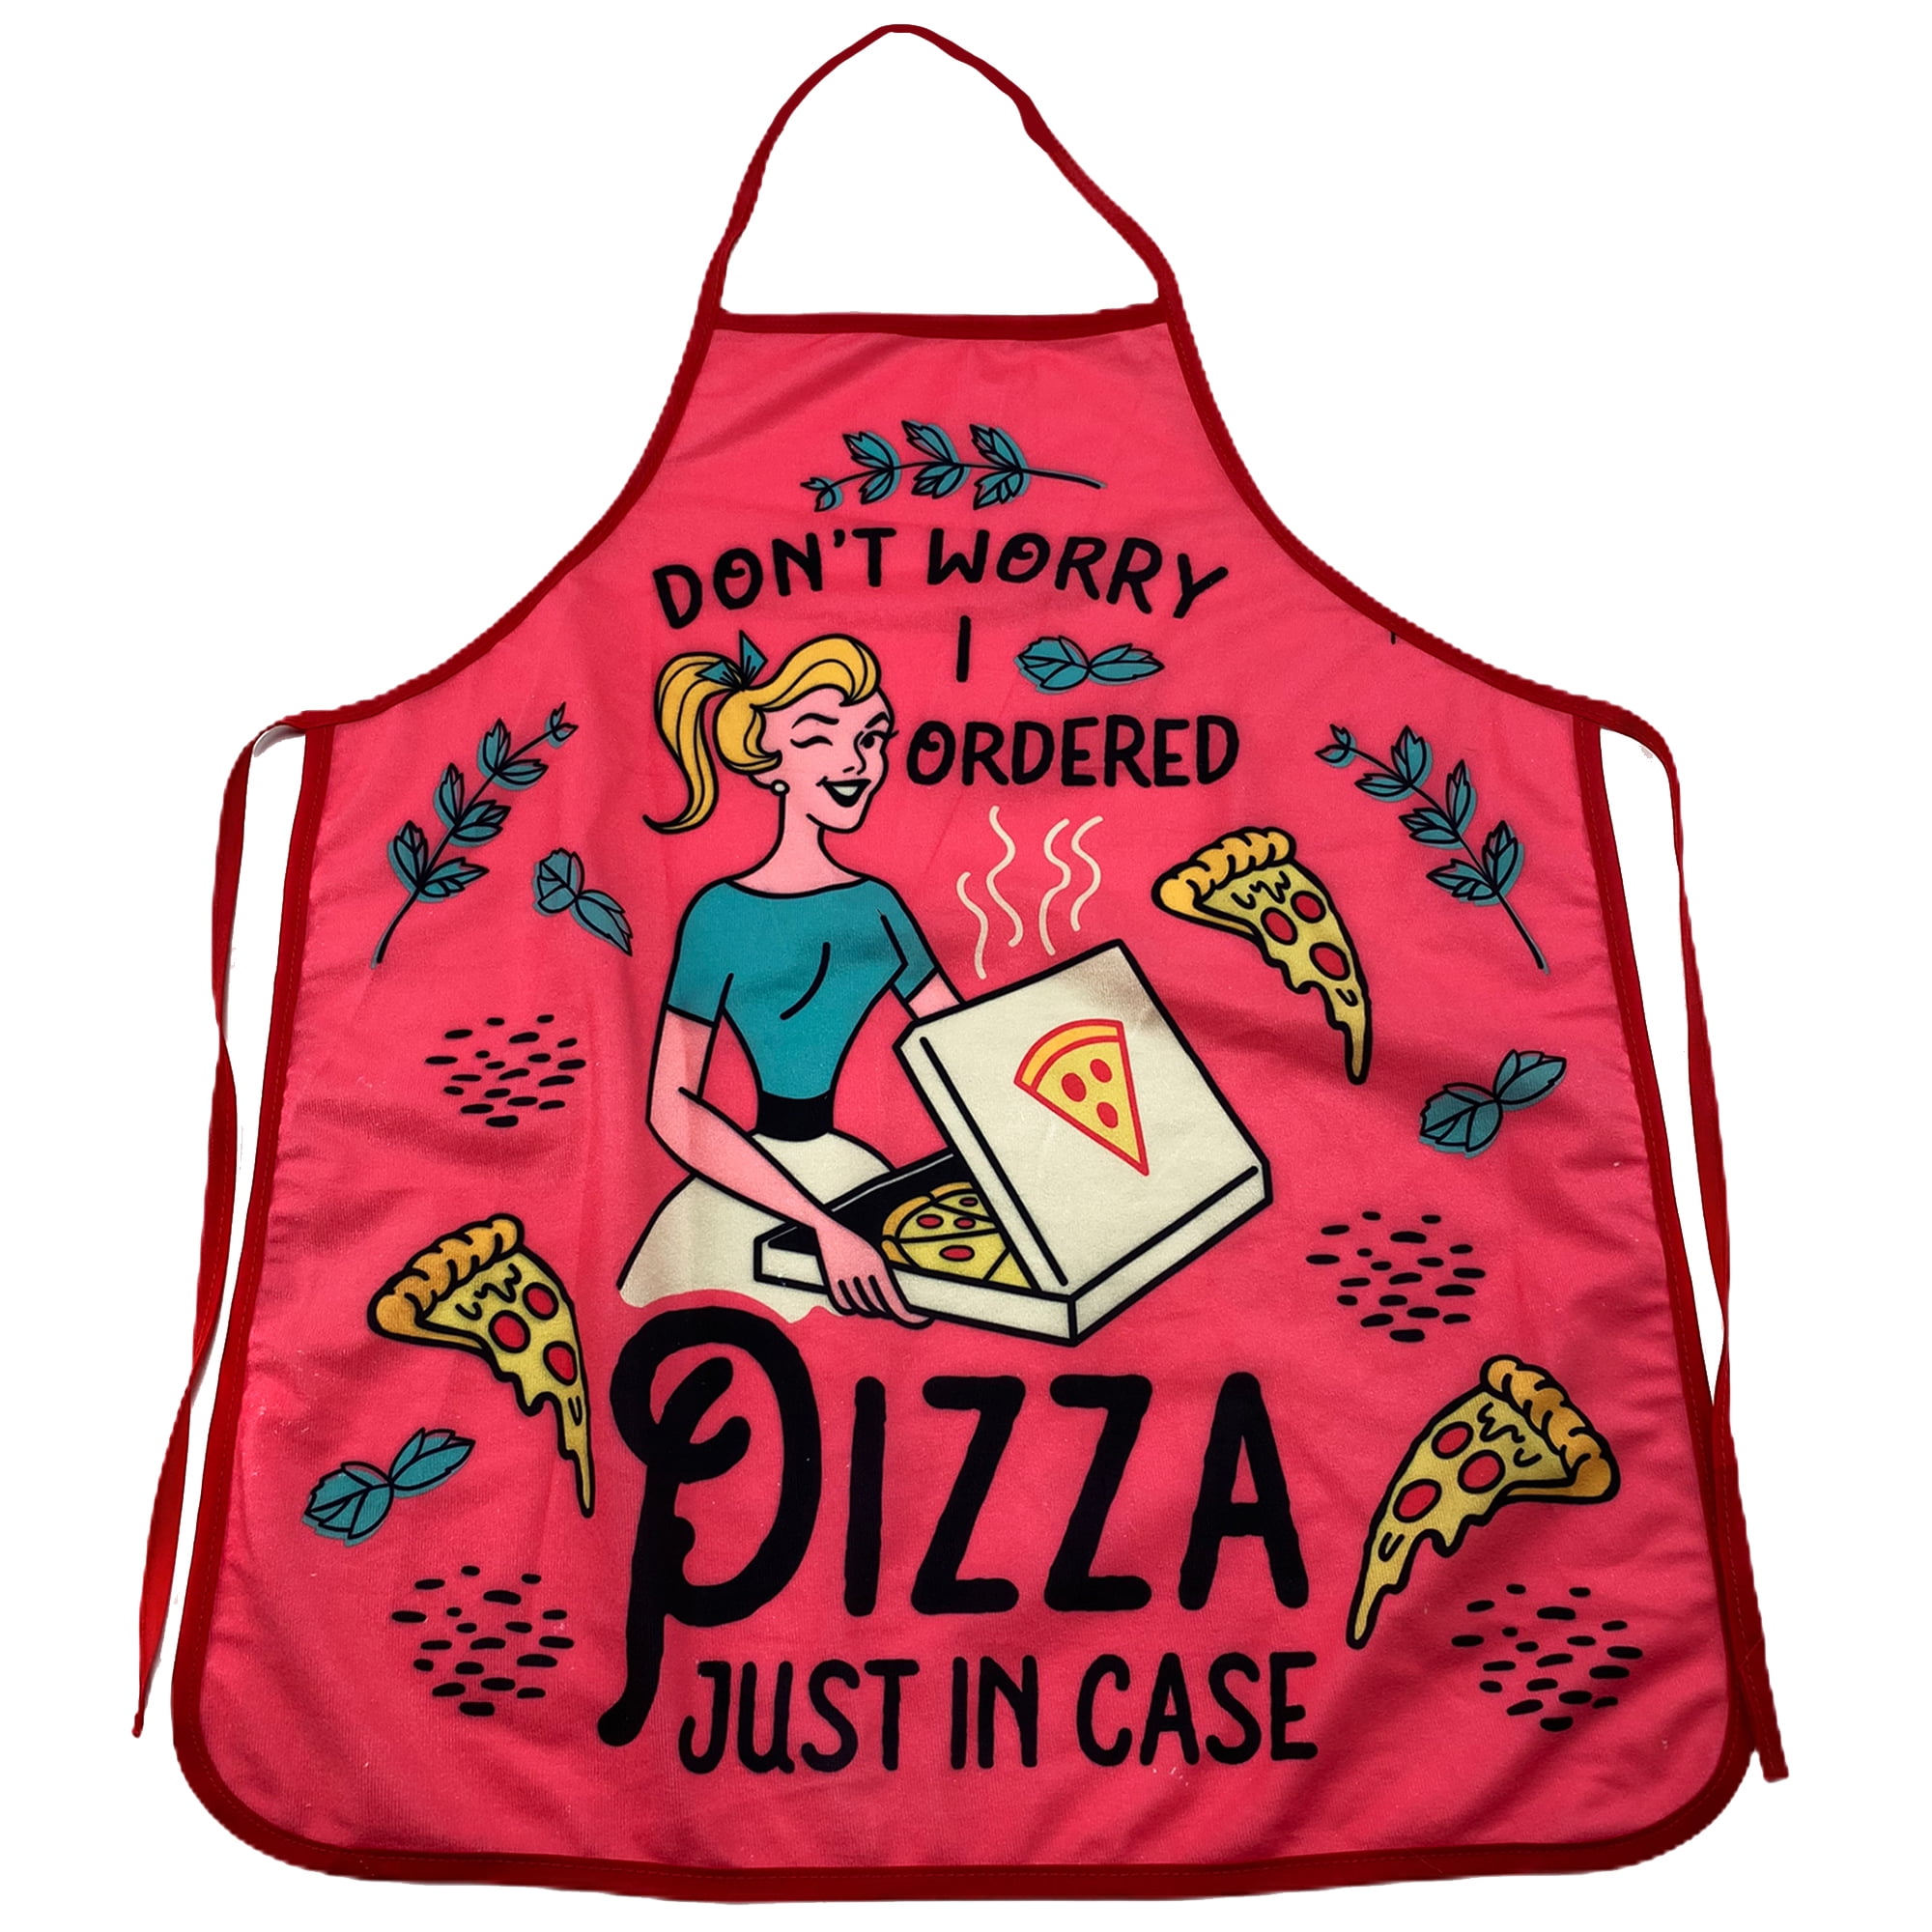 Funny Novelty Apron Kitchen Cooking Pizza And Your Opinion 